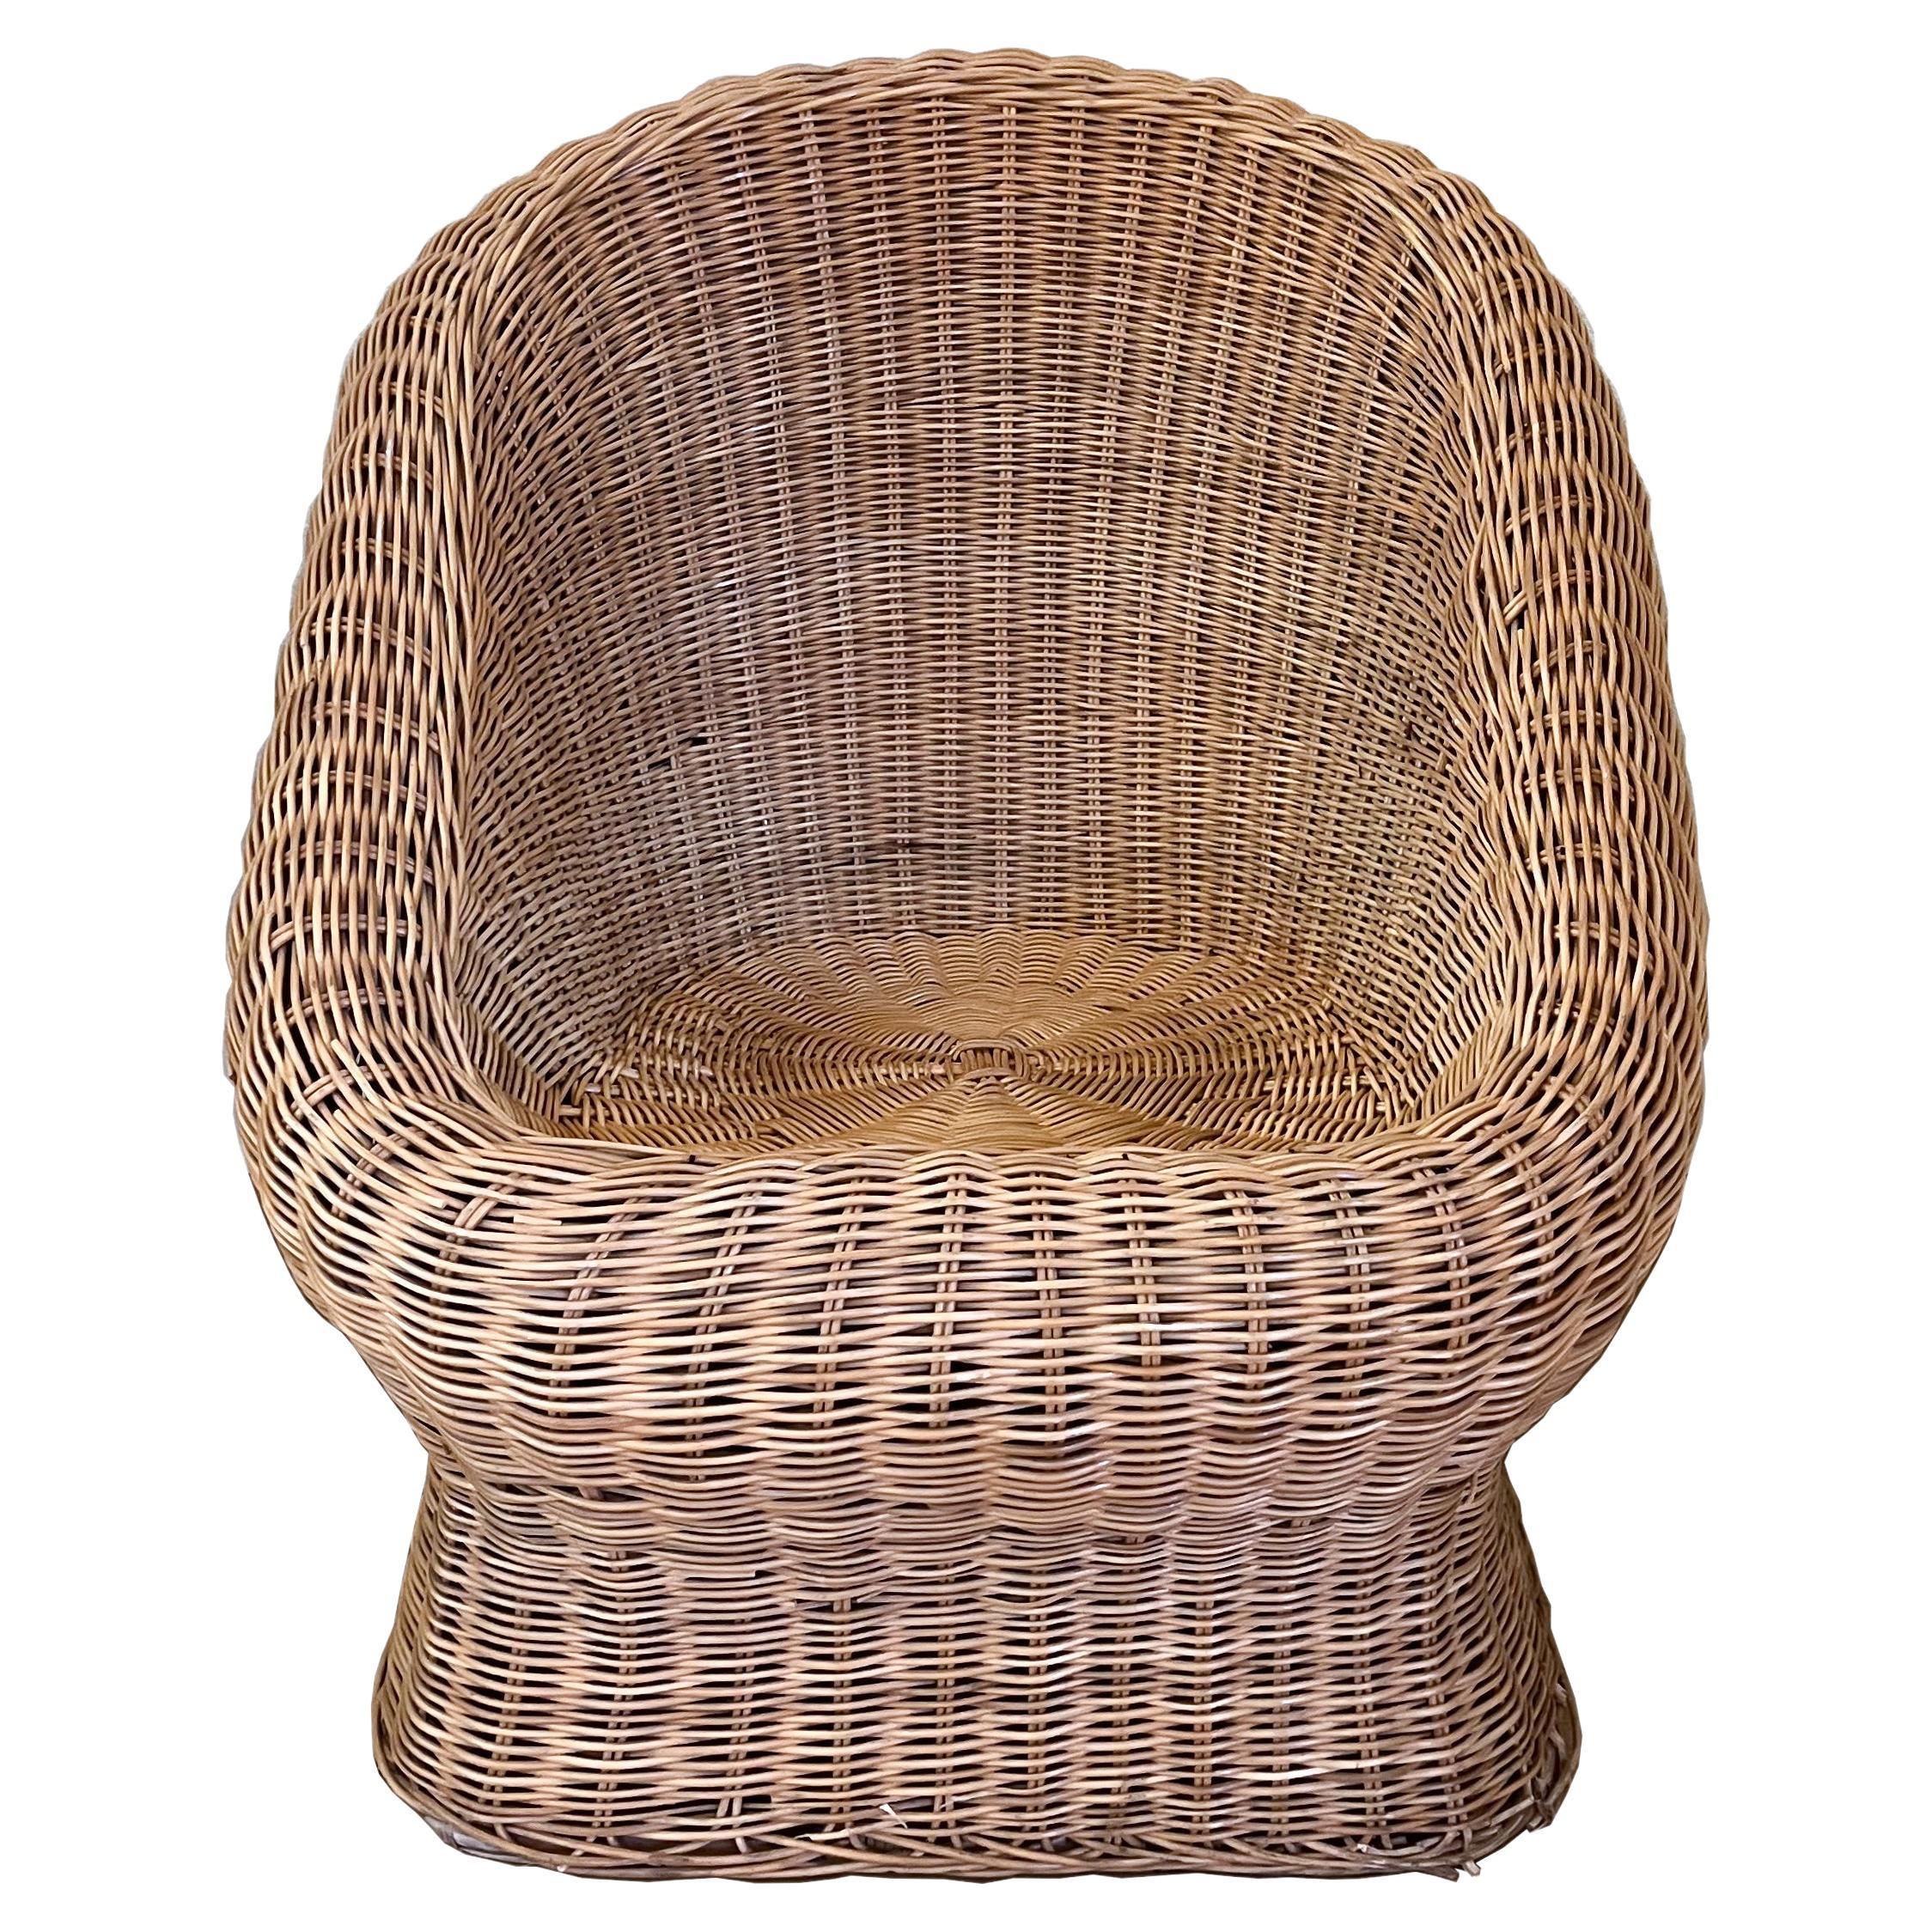 Vintage Woven Wicker Club Chair